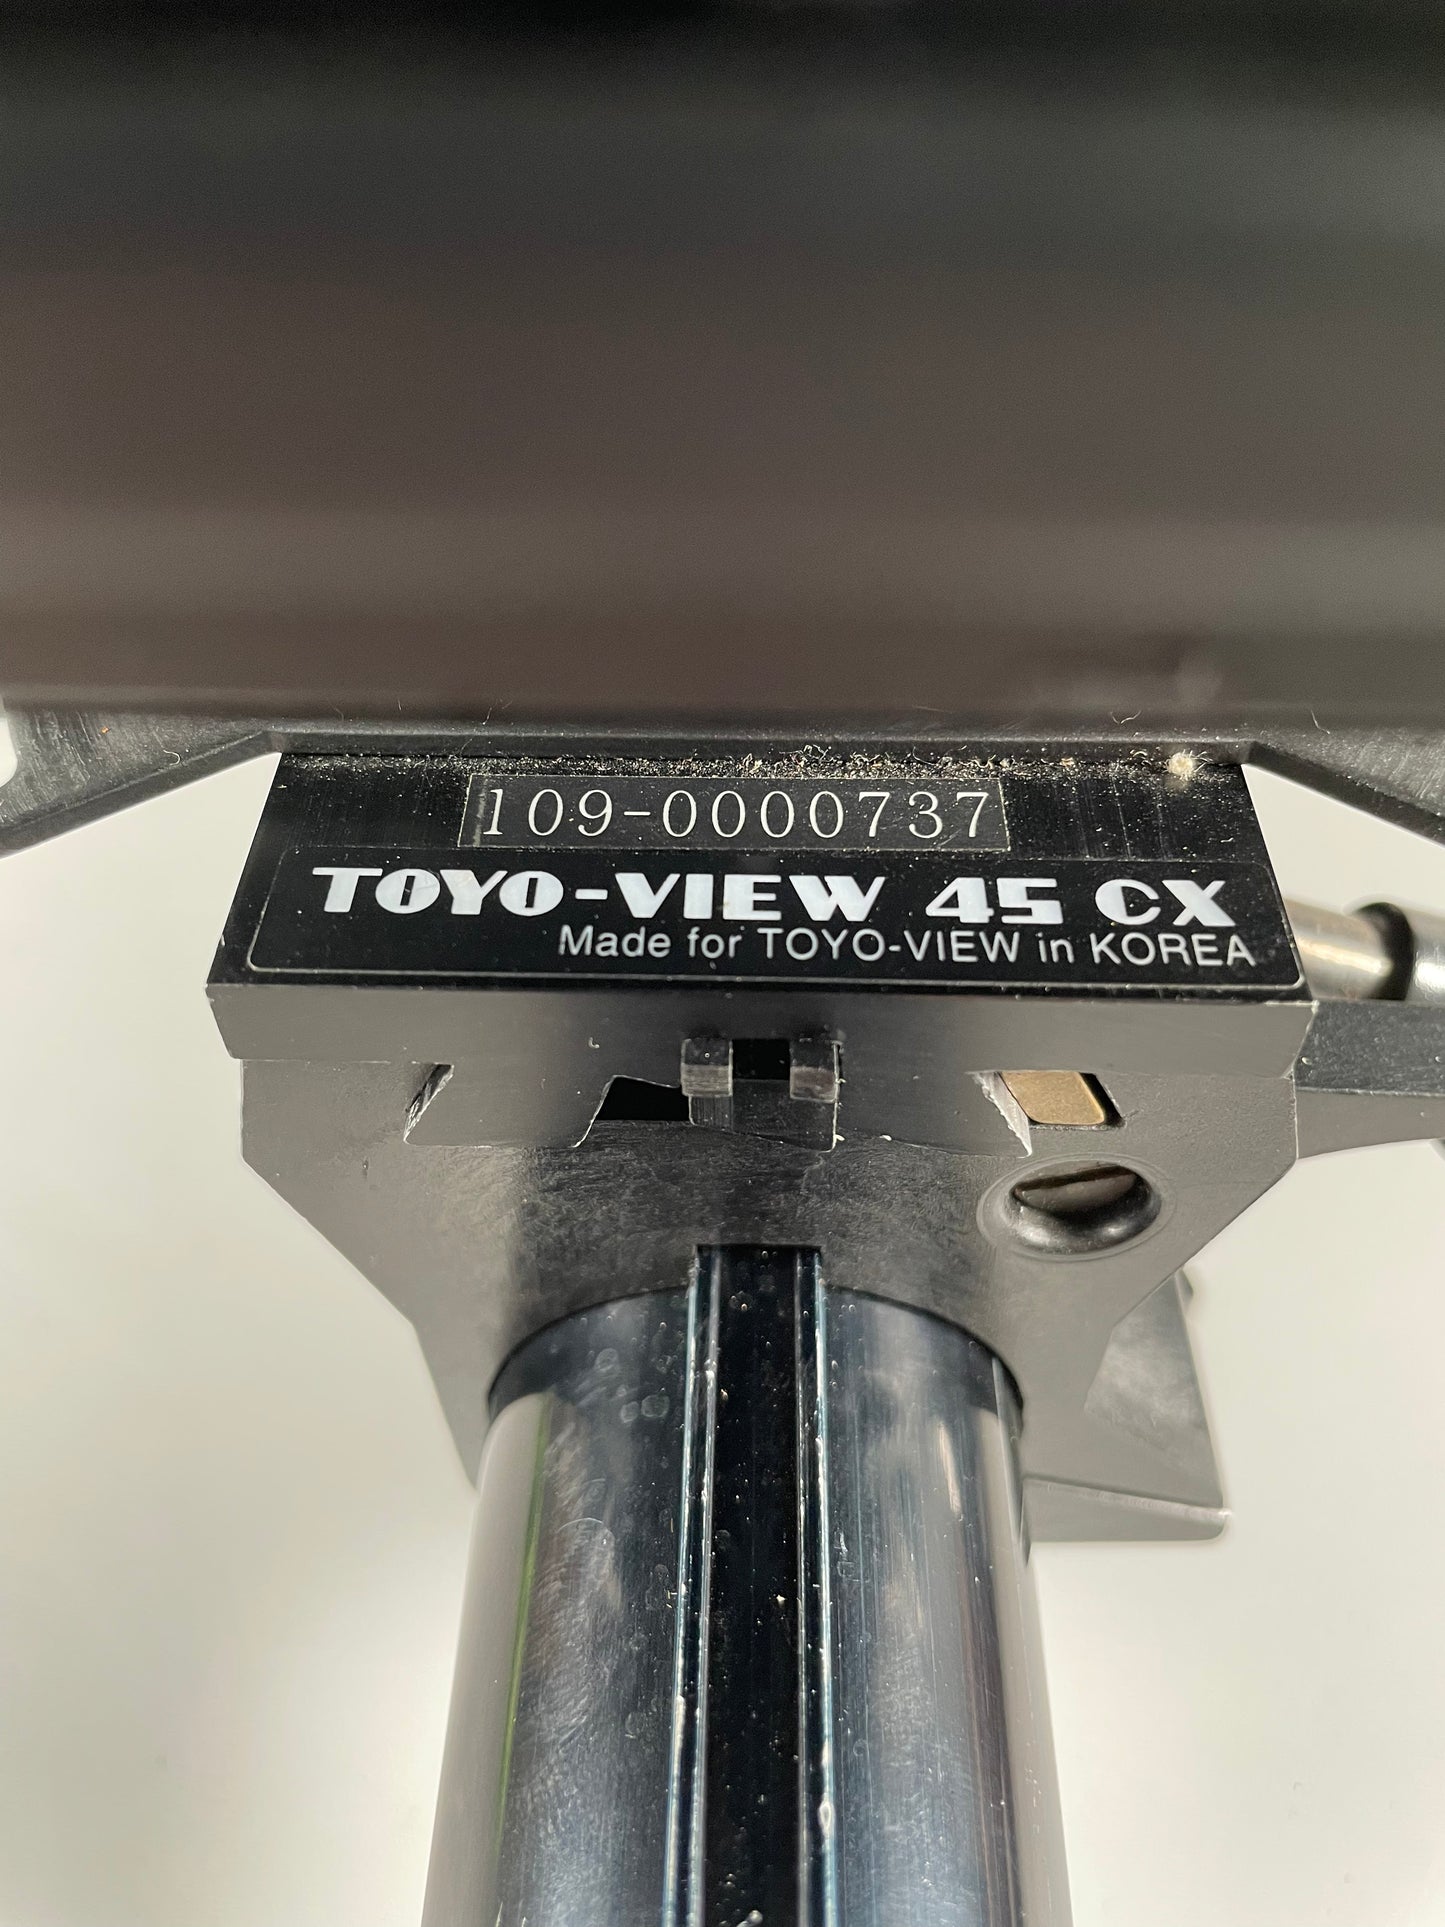 Toyo 45CX 4x5 Monorail Large Format Camera